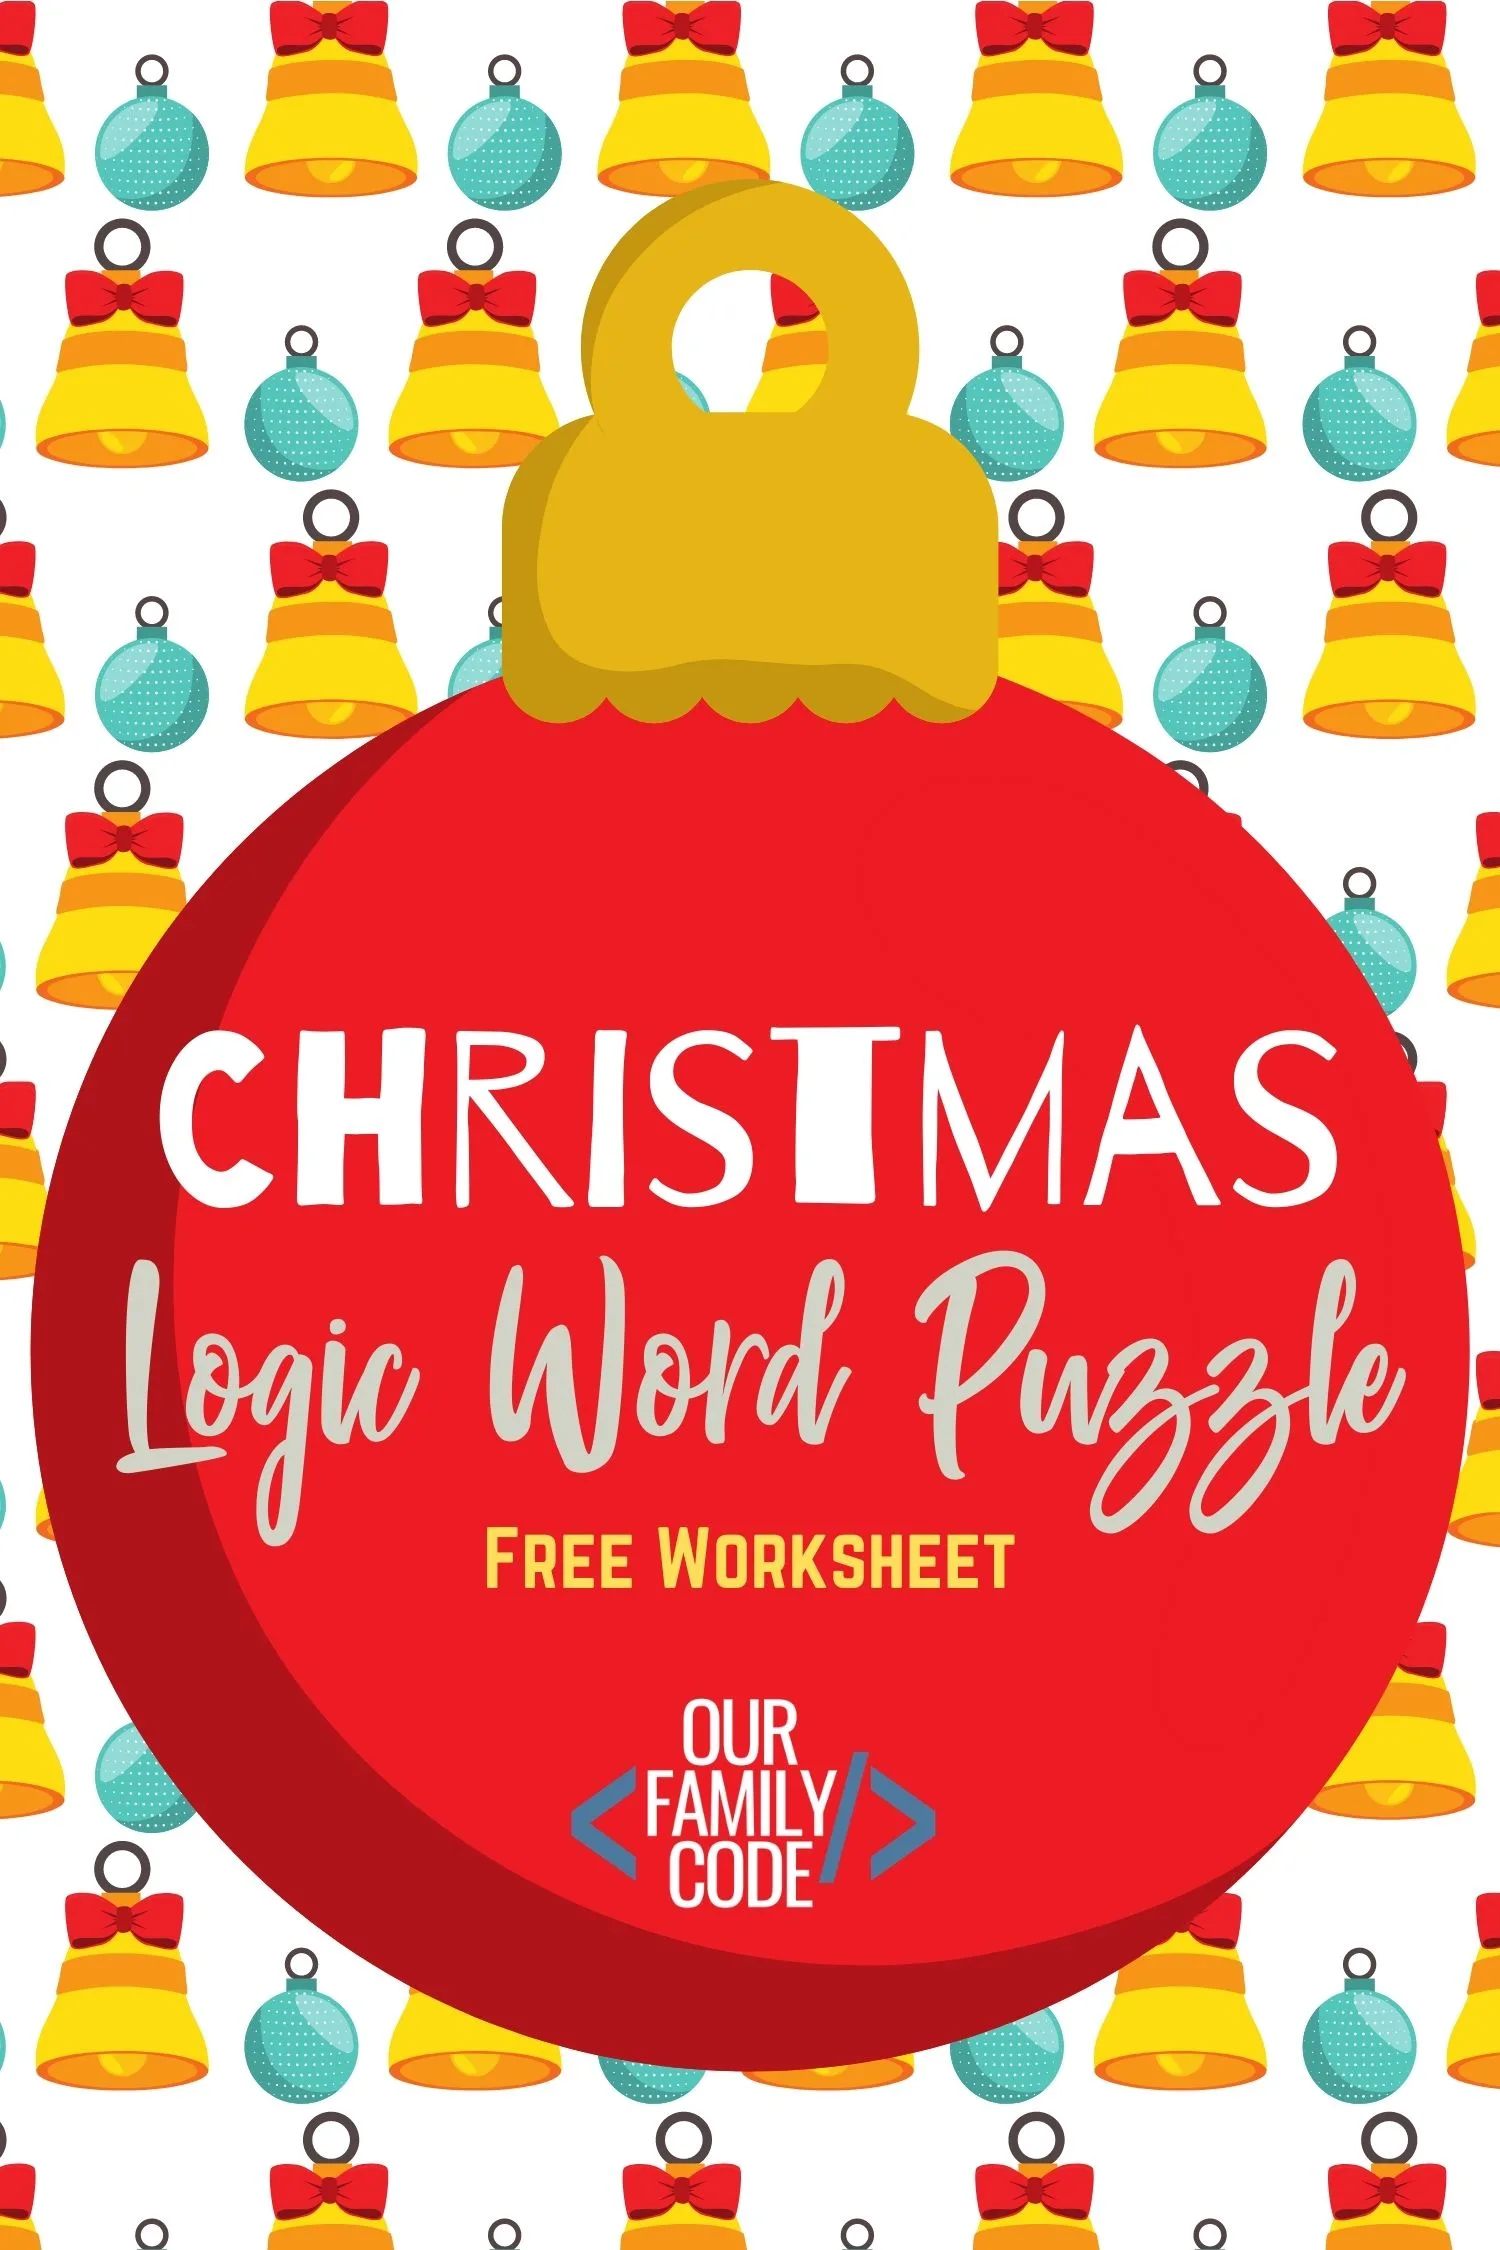 This Christmas logic word puzzle activity is a way for kids to use logical thinking and pattern matching paired with spatial recognition and spelling. #Christmasworksheet #teachkidstocode #logicpuzzles